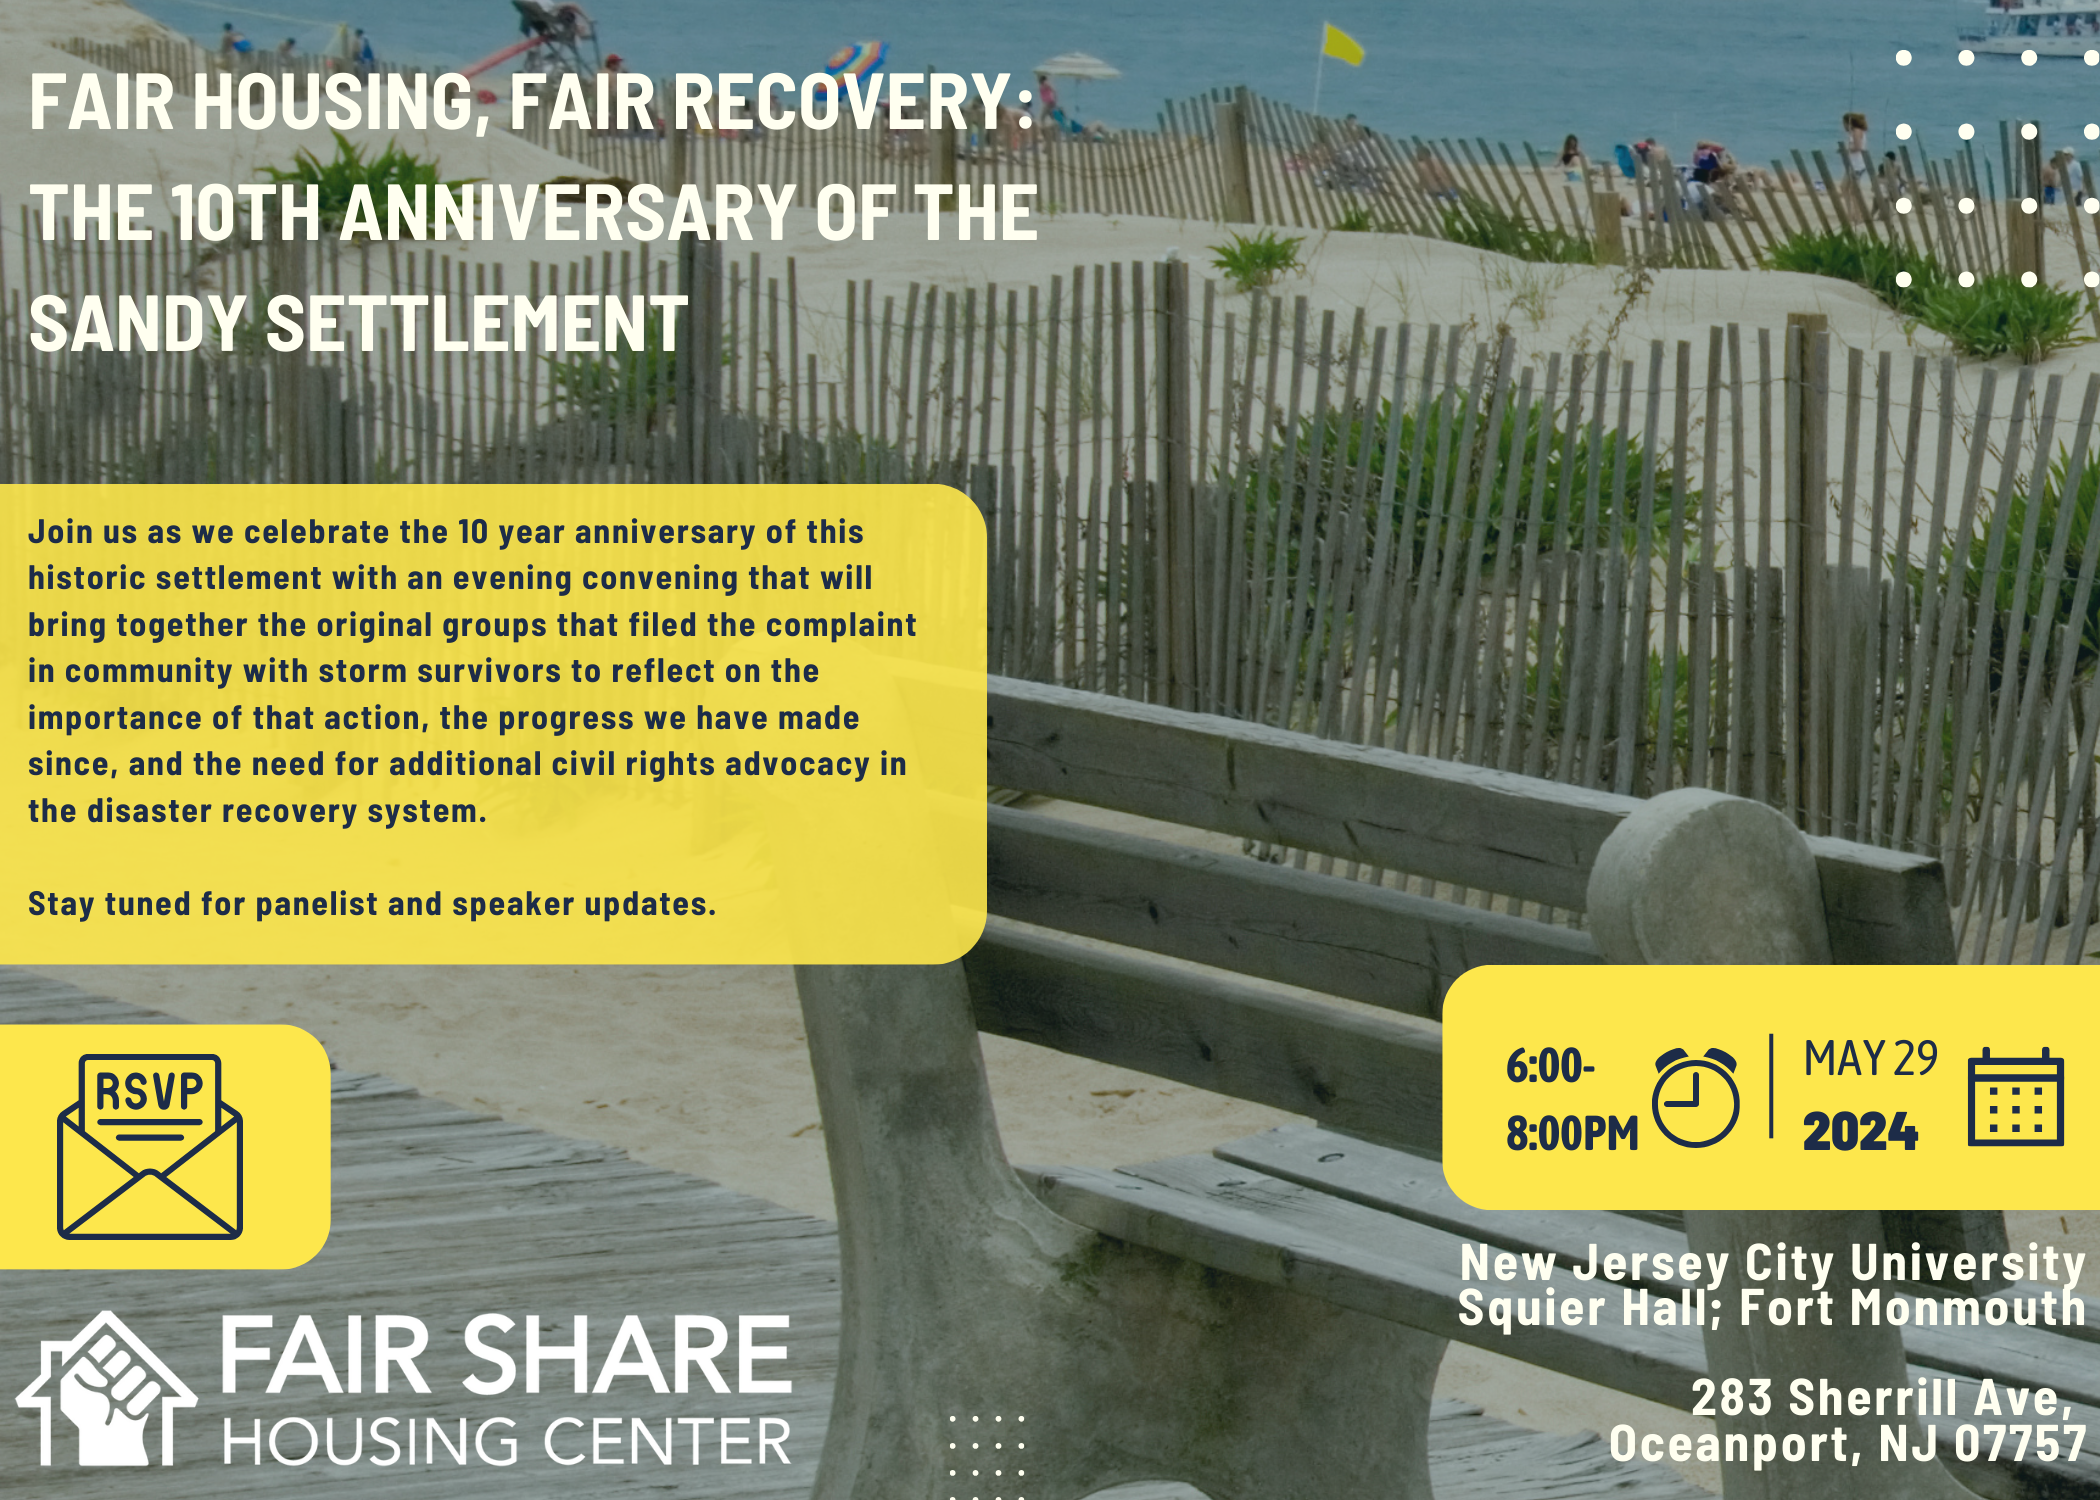 Fair Housing, Fair Recovery: The Tenth Anniversary of the Sandy Settlement